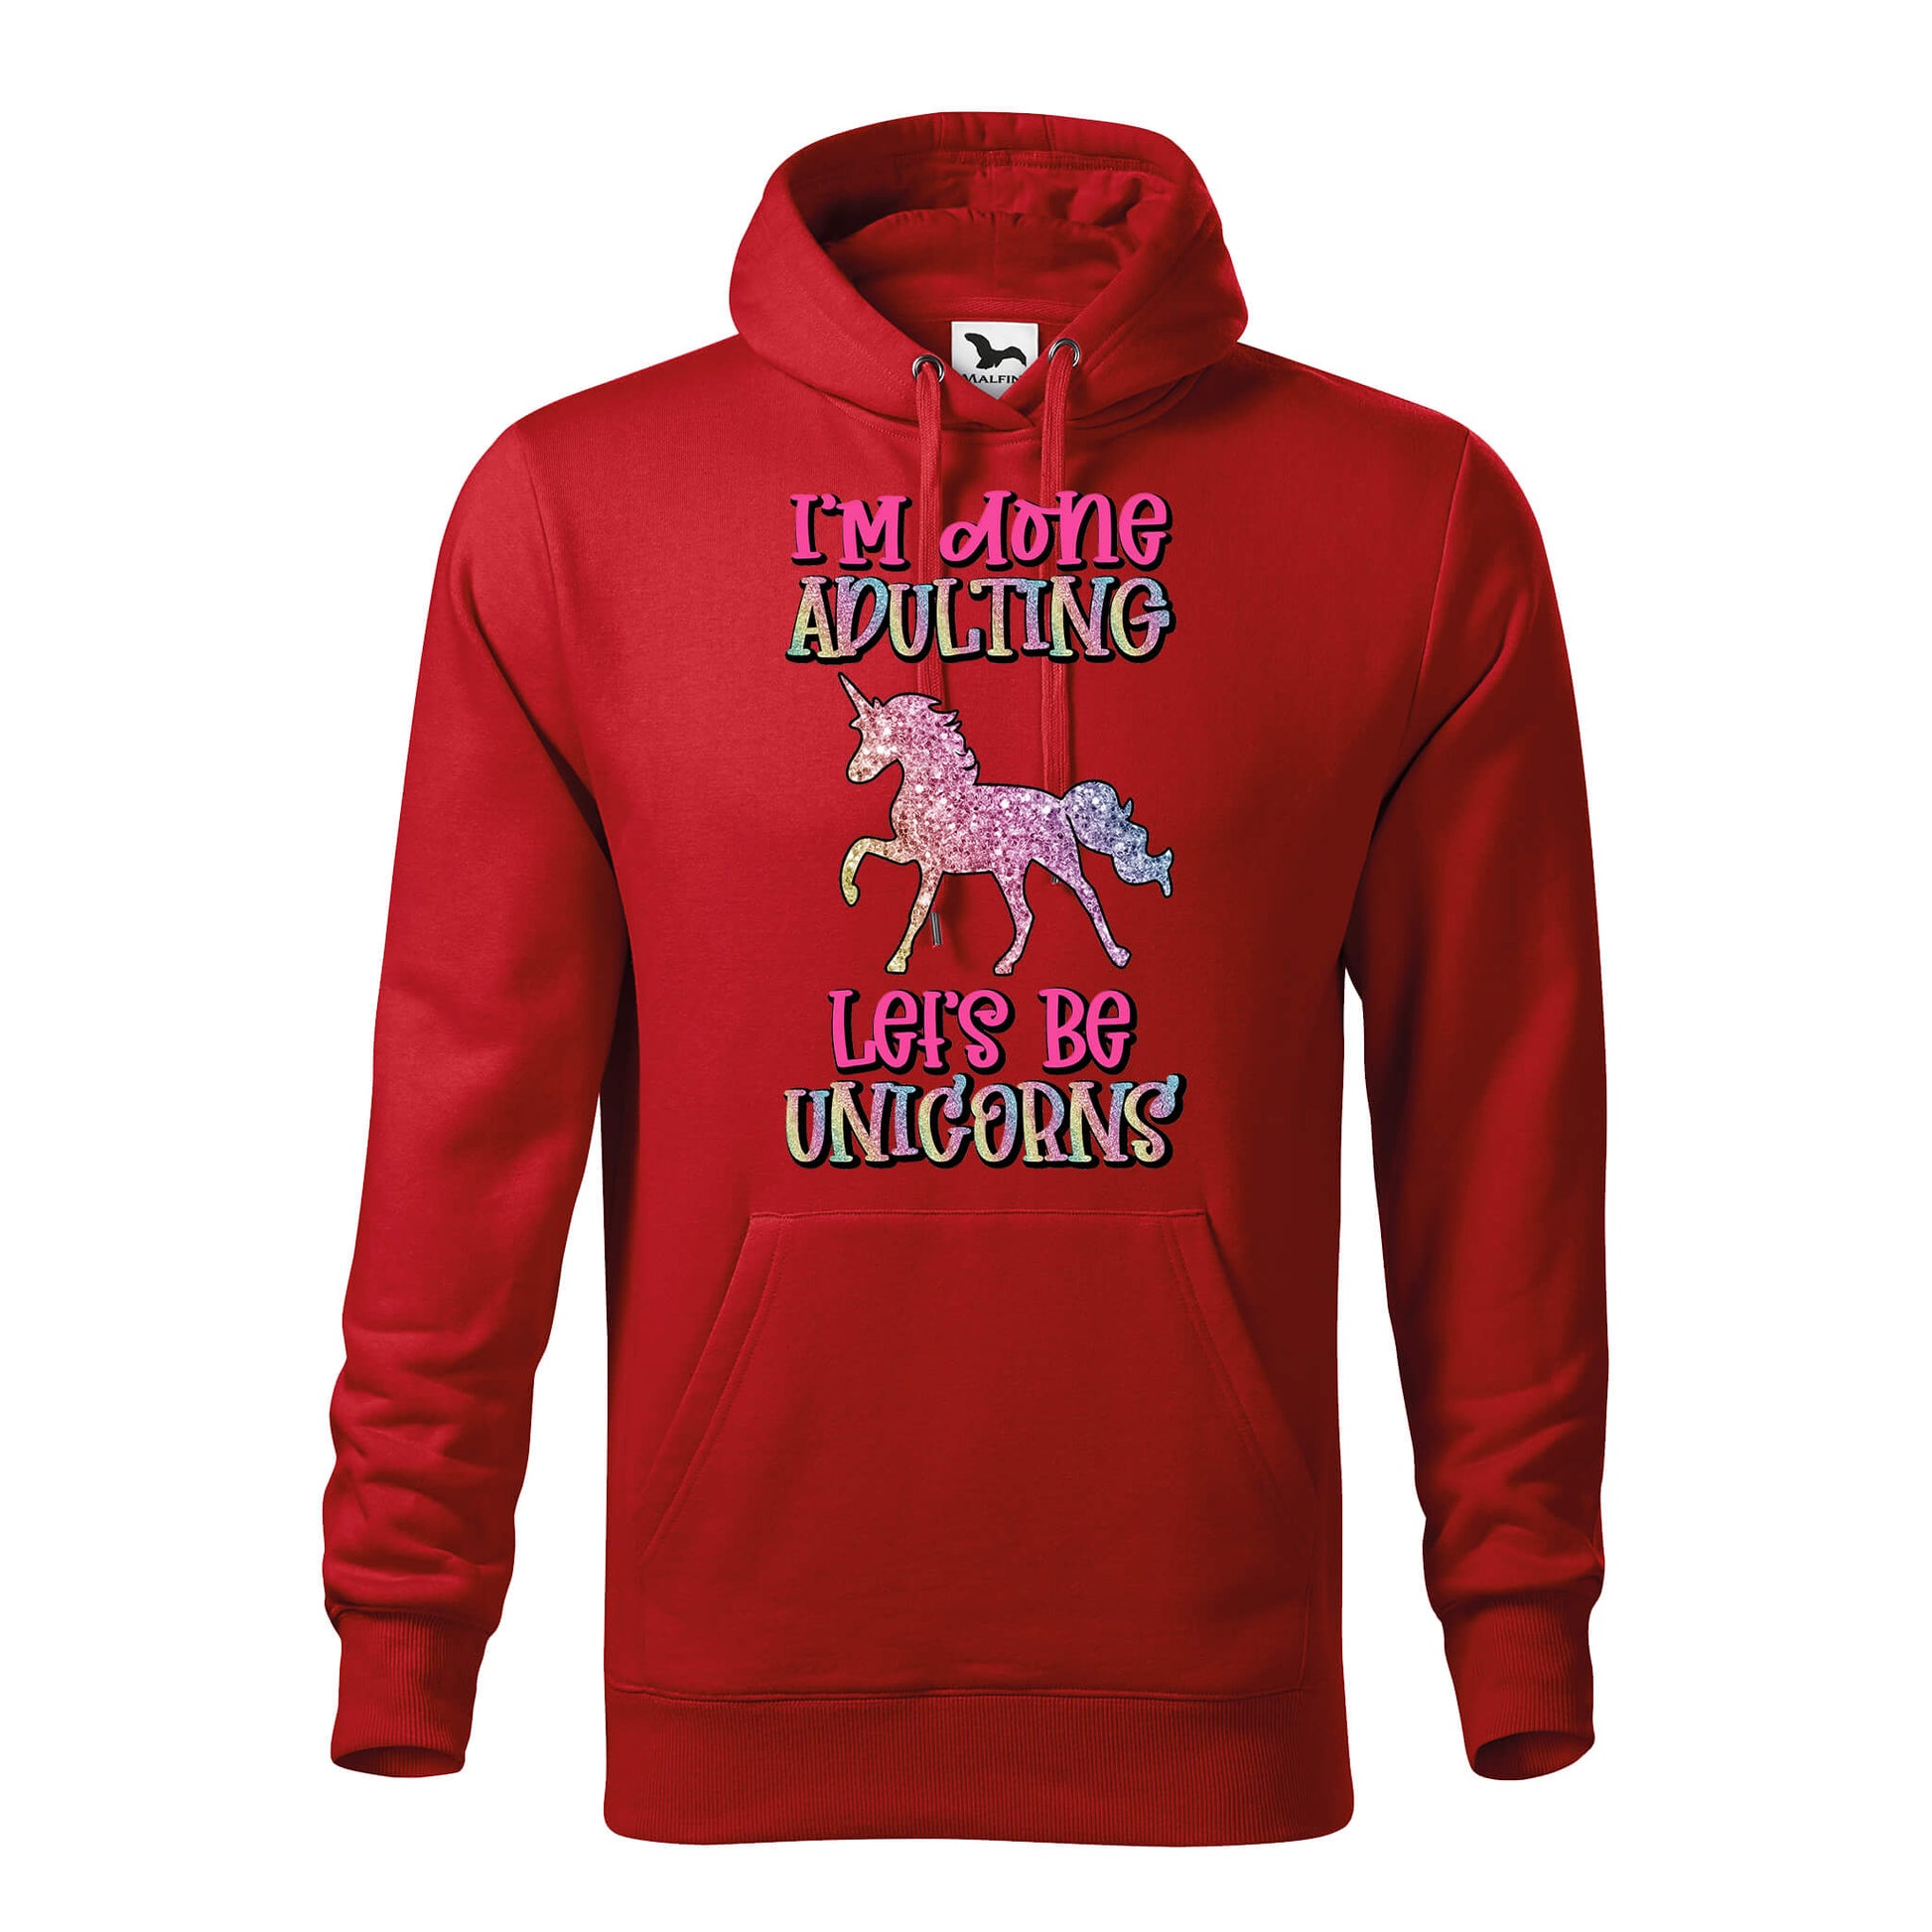 Im done adulting lets be unicorns hoodie - rvdesignprint